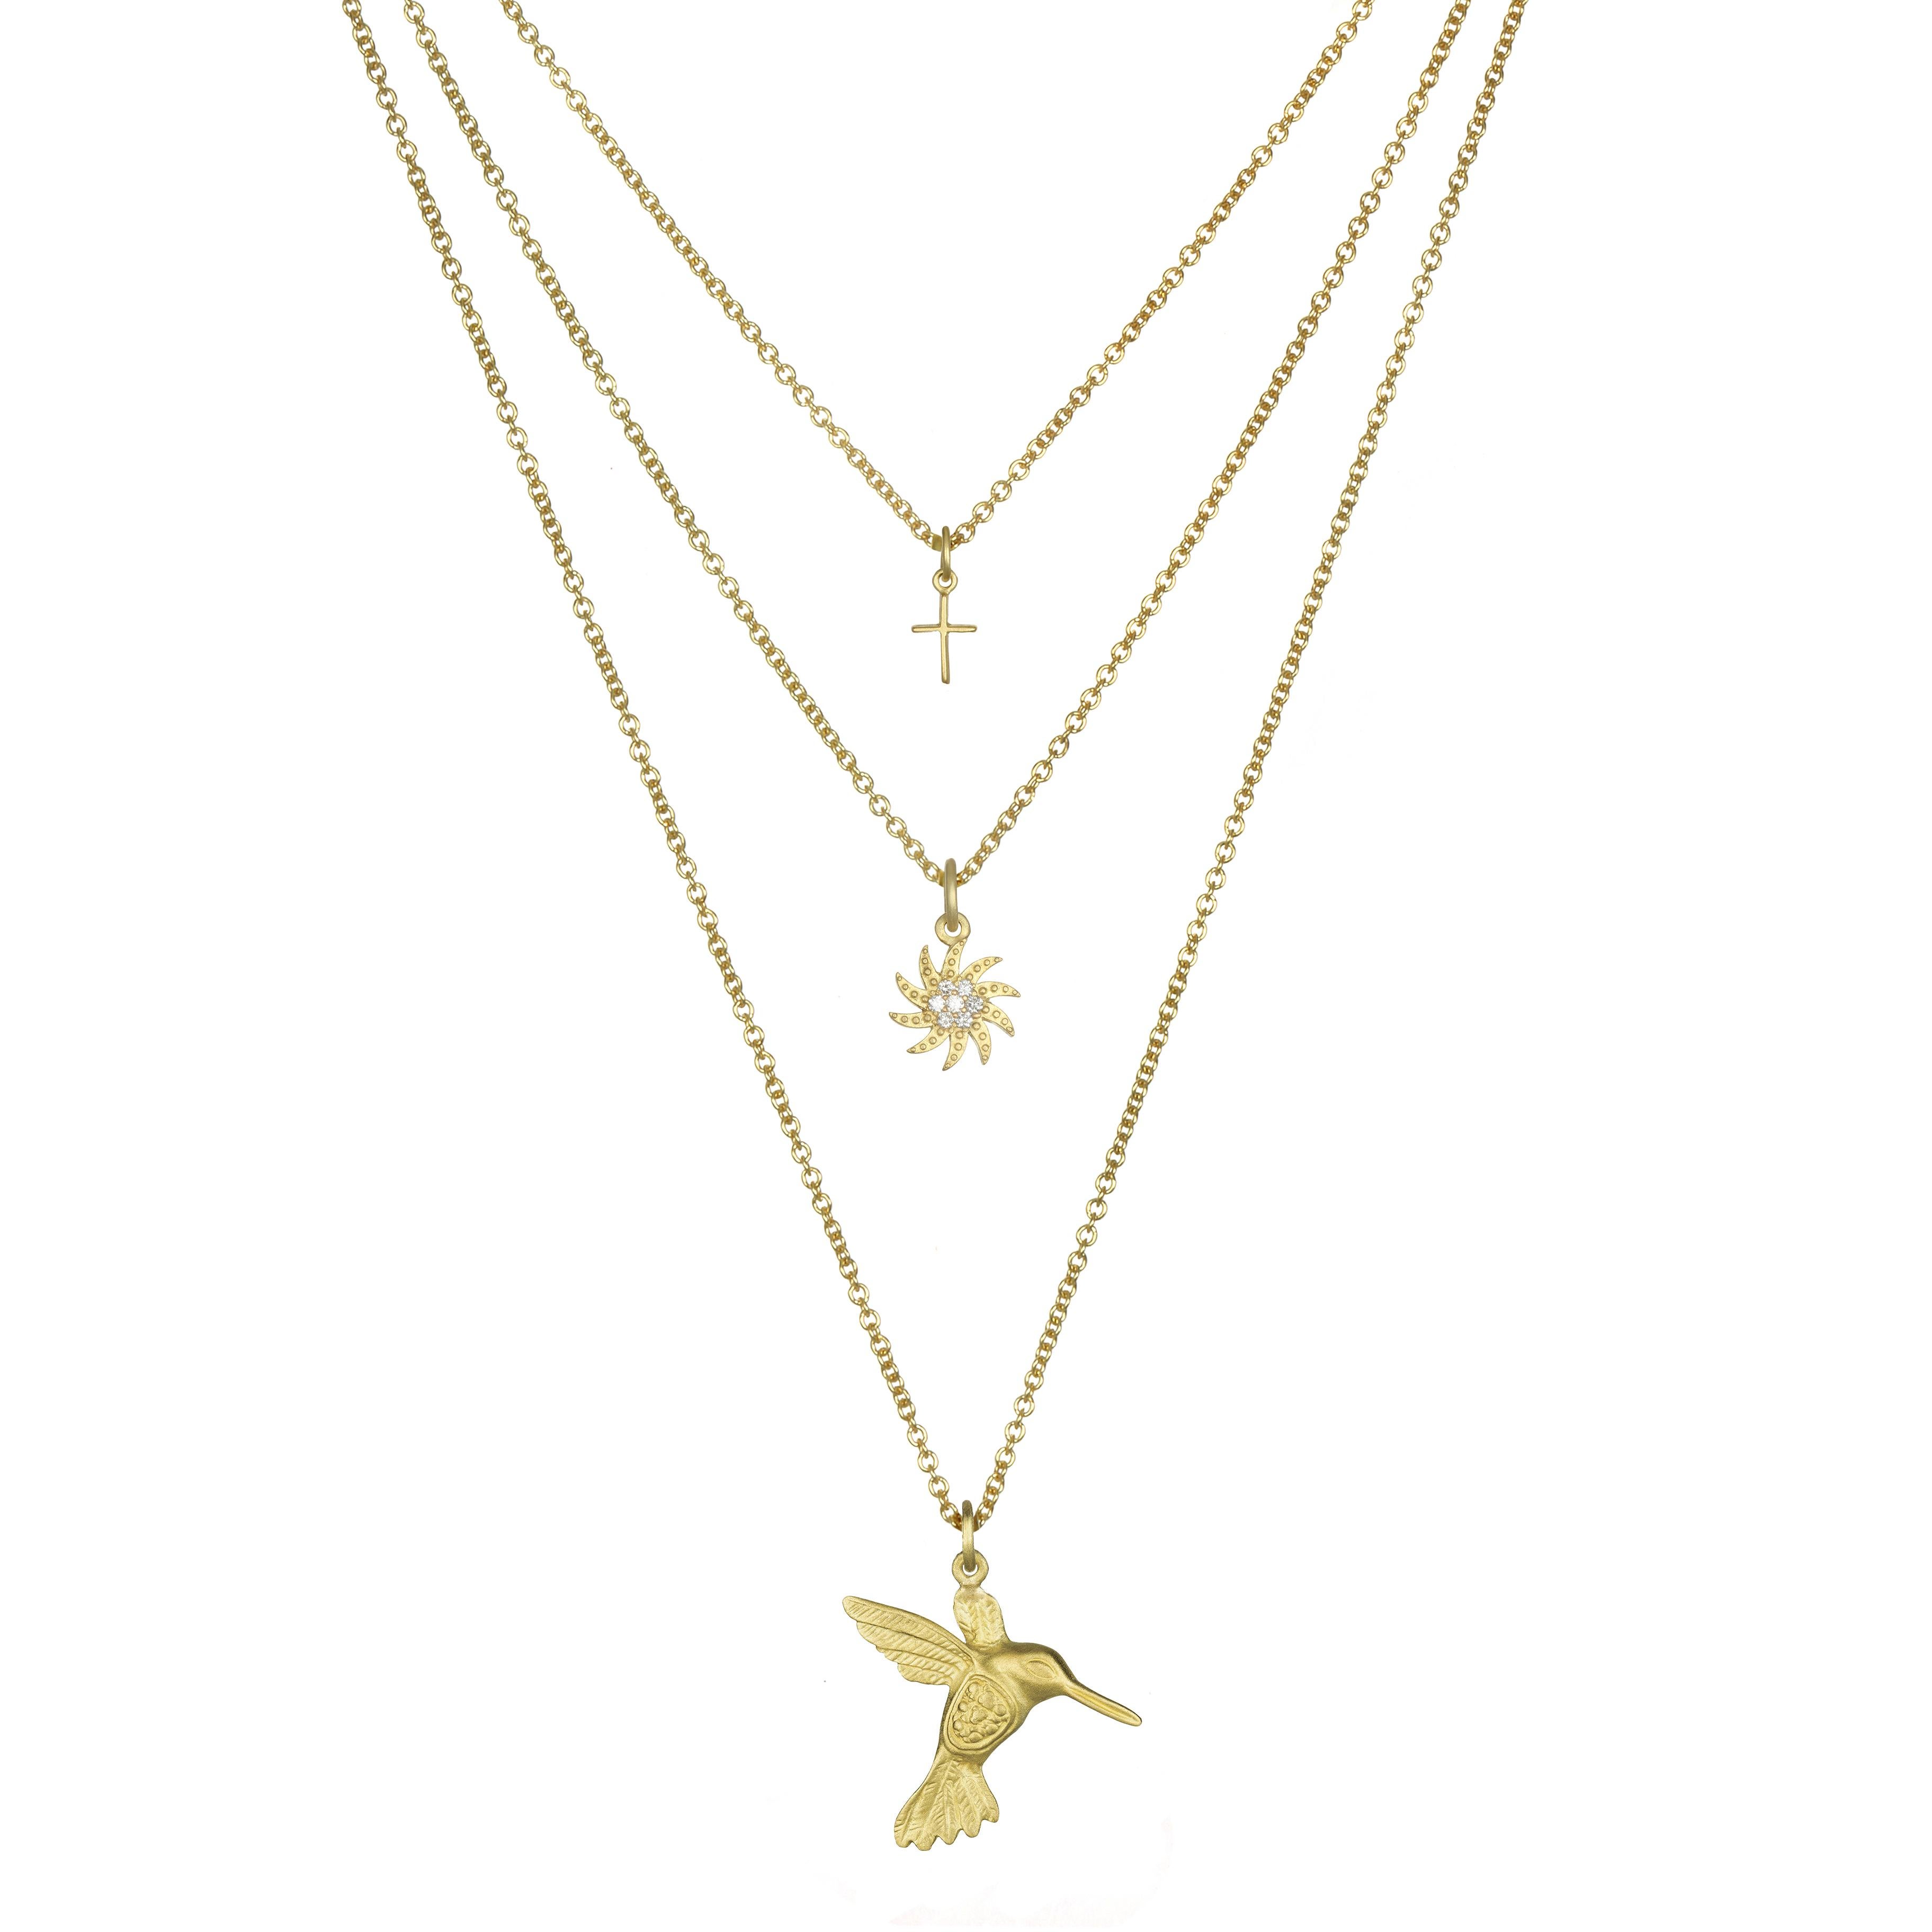 For the hummingbird lover - symbolizing good luck, eternity, and endurance.
The cable chain is 16-18